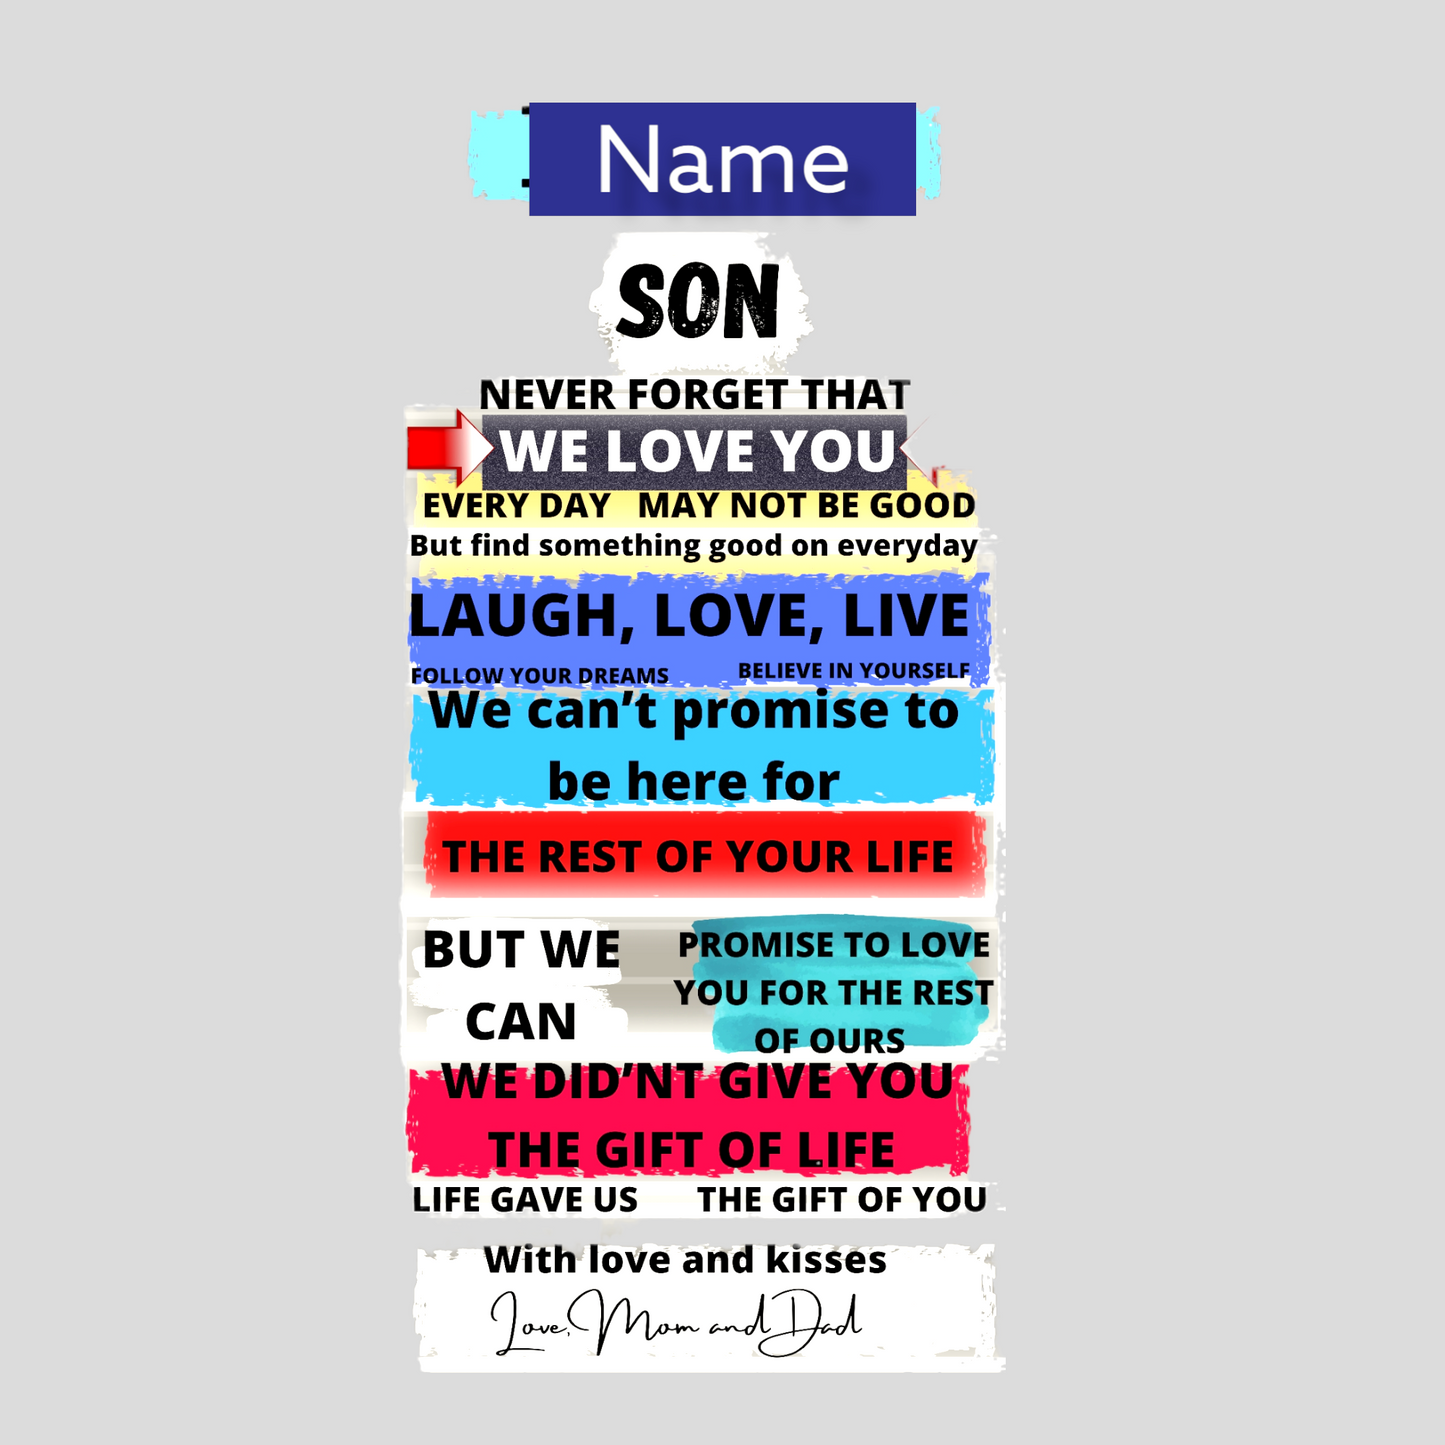 Wall canvas for boy, gift for son, Personalized canvas, Custom Wall Art for boy, Boy Room Decoration, Motivation, Personalized message